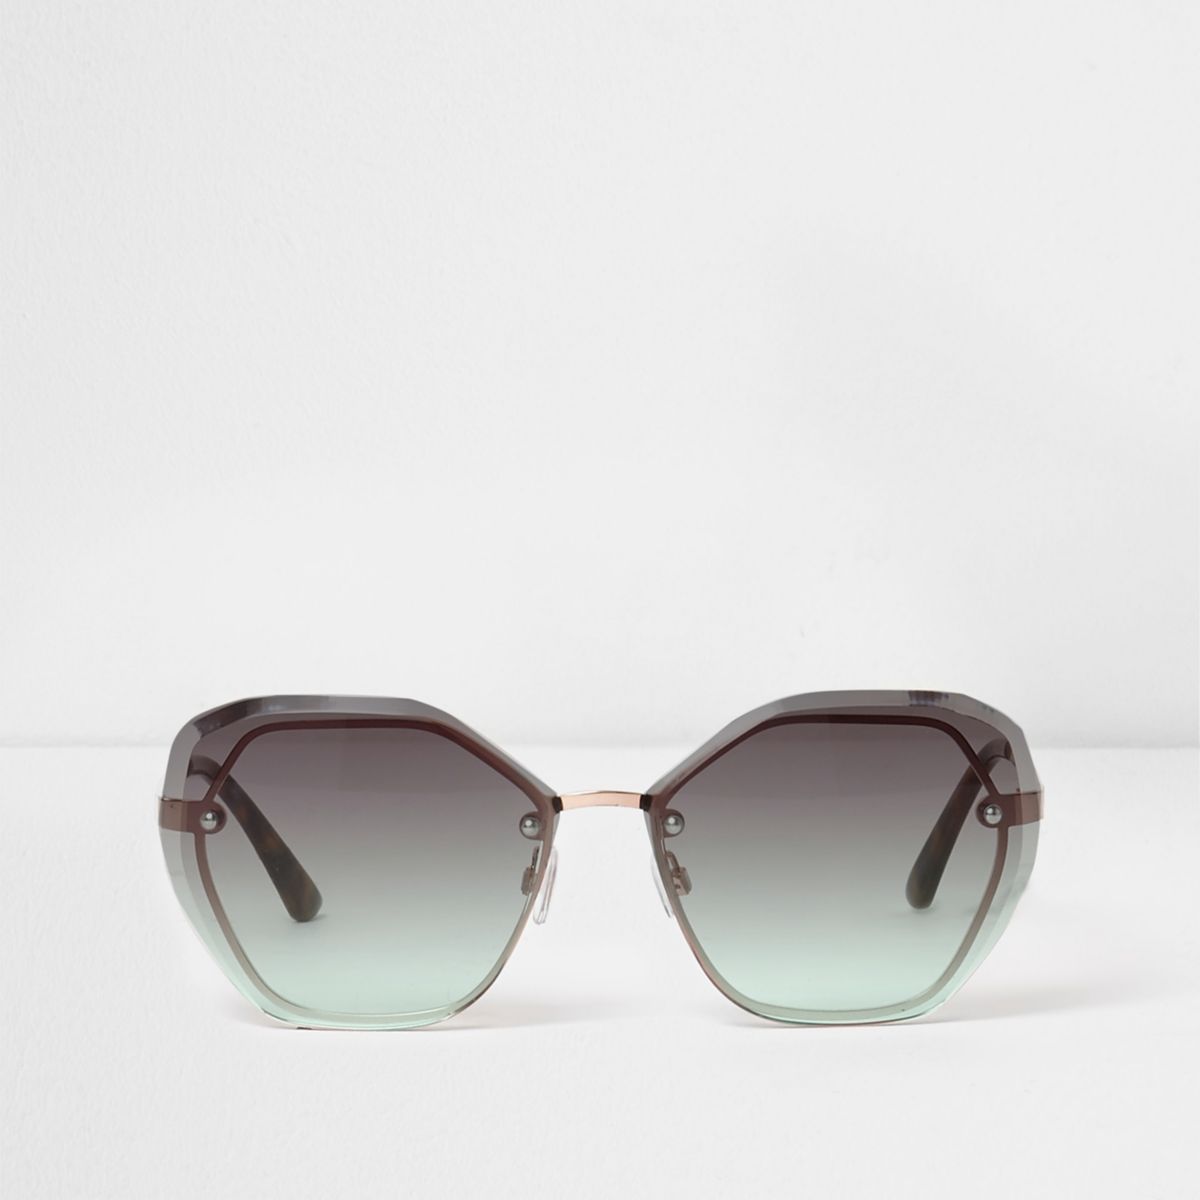 Take a look at the different pairs of sunglasses that are emerging for spring accessories.